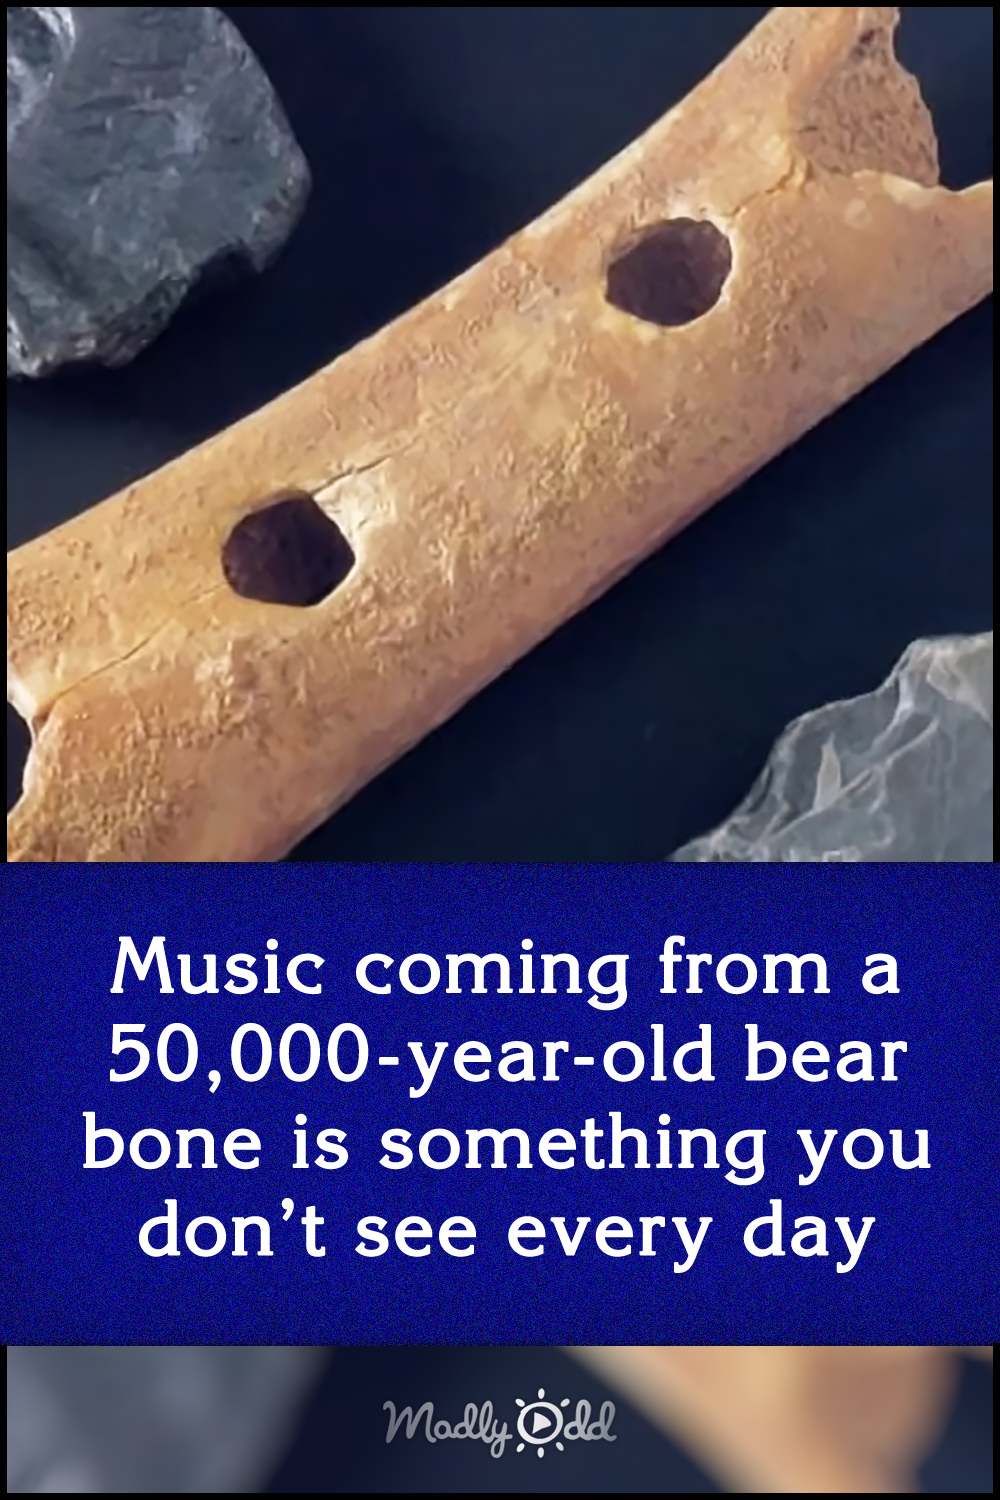 Music coming from a 50,000-year-old bear bone is something you don’t see every day